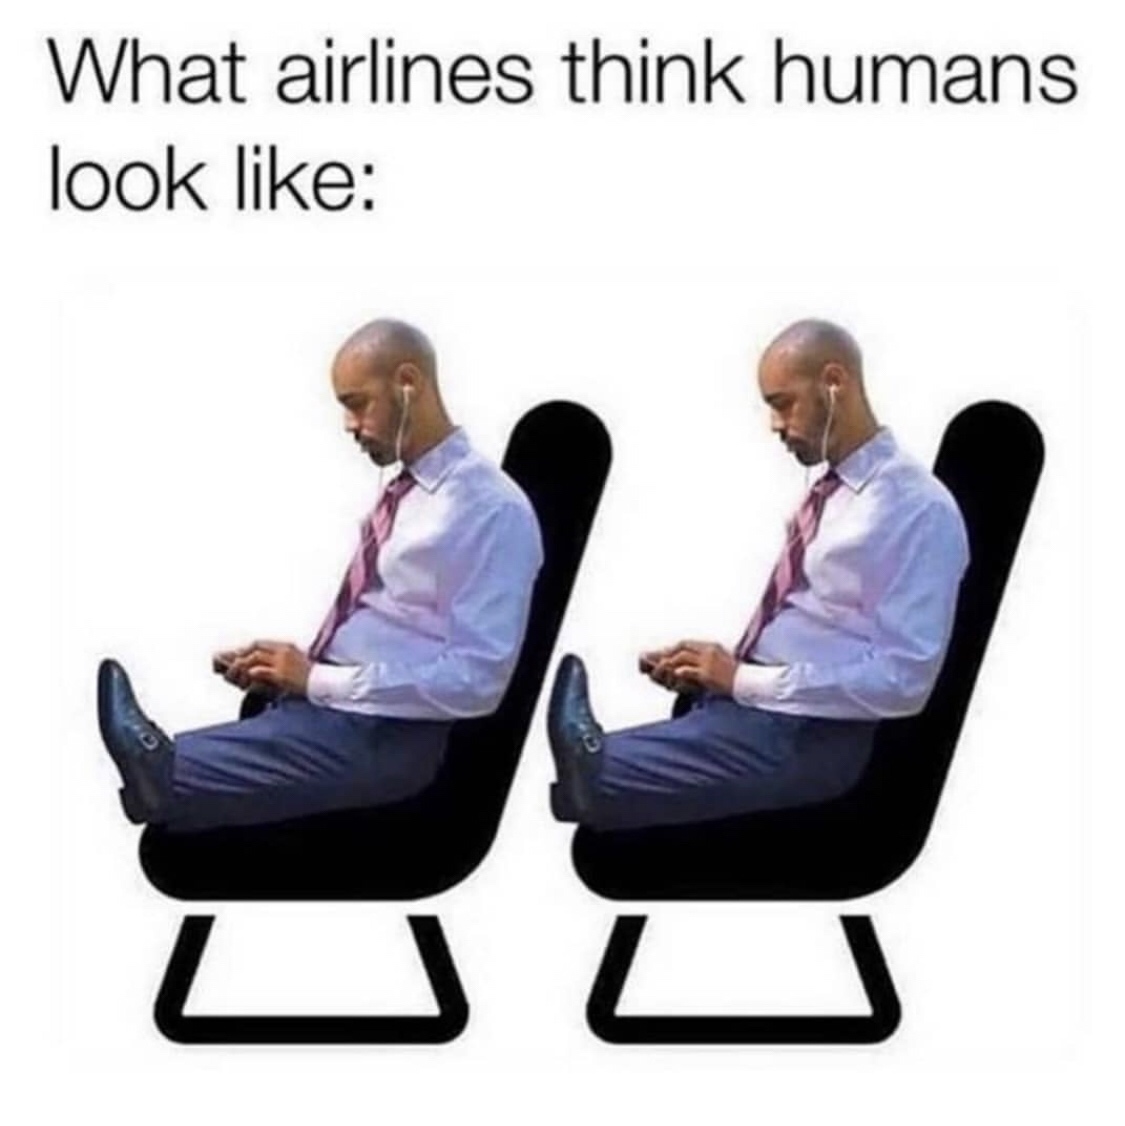 airlines think humans look like - What airlines think humans look